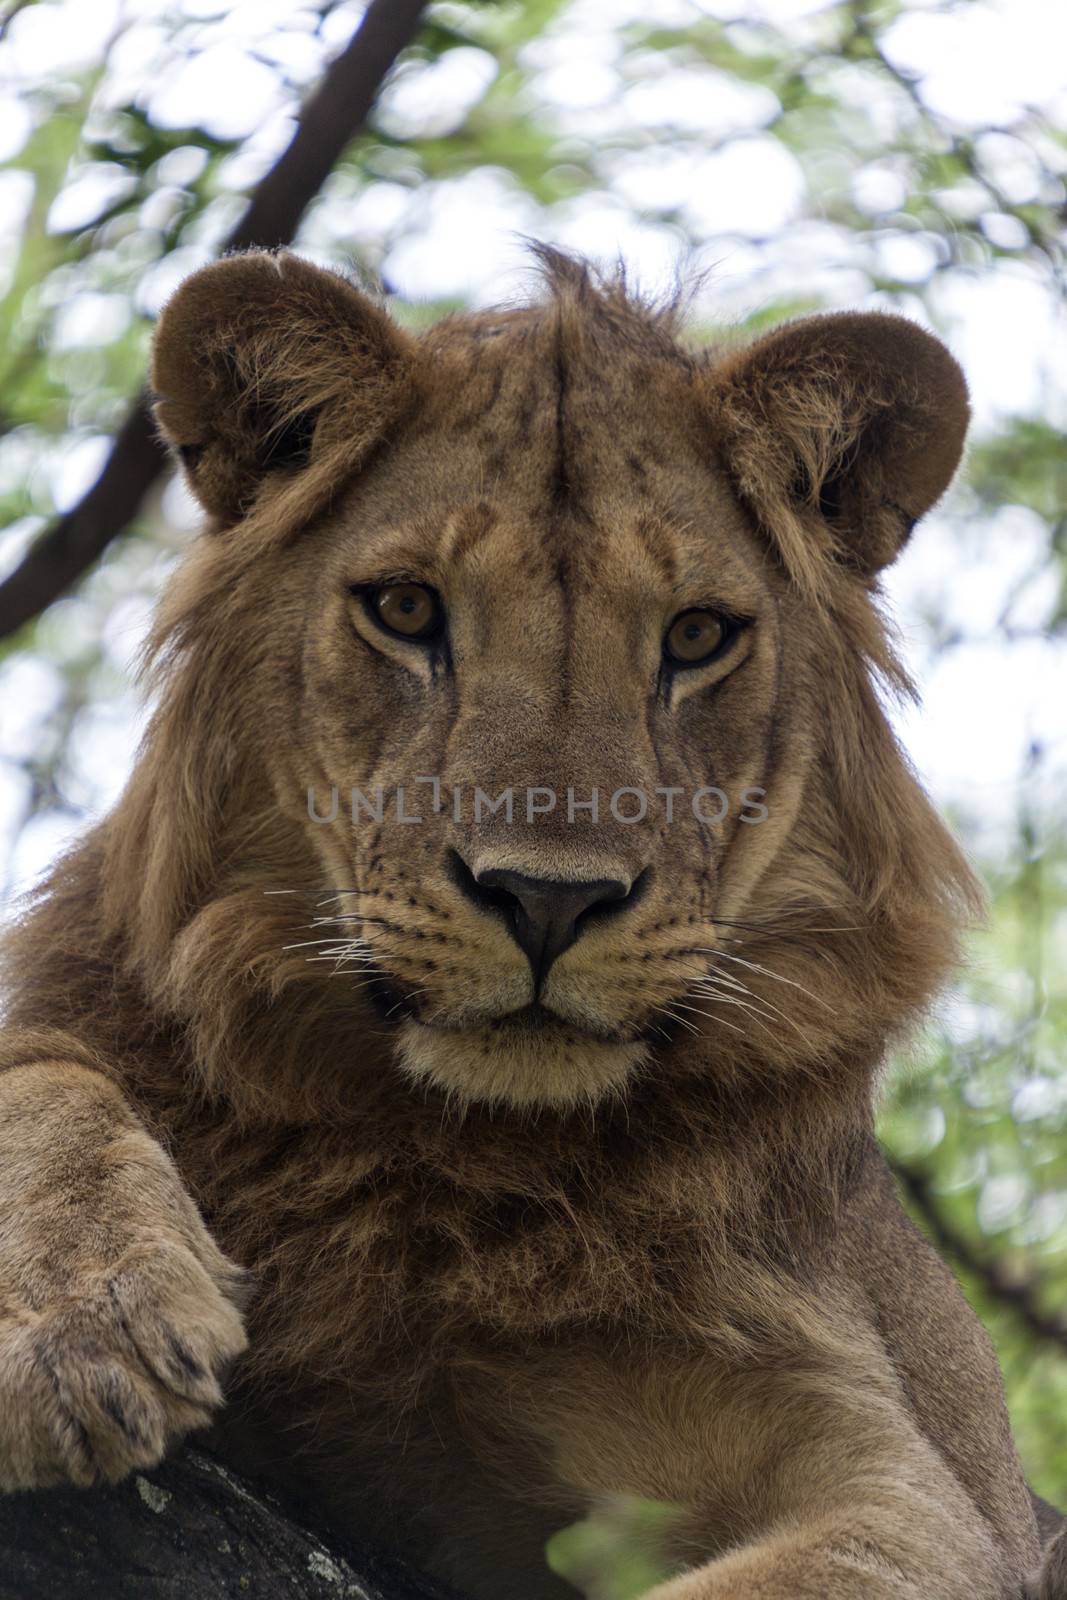 Lion resting on a branch in a tree watching the surroundings.